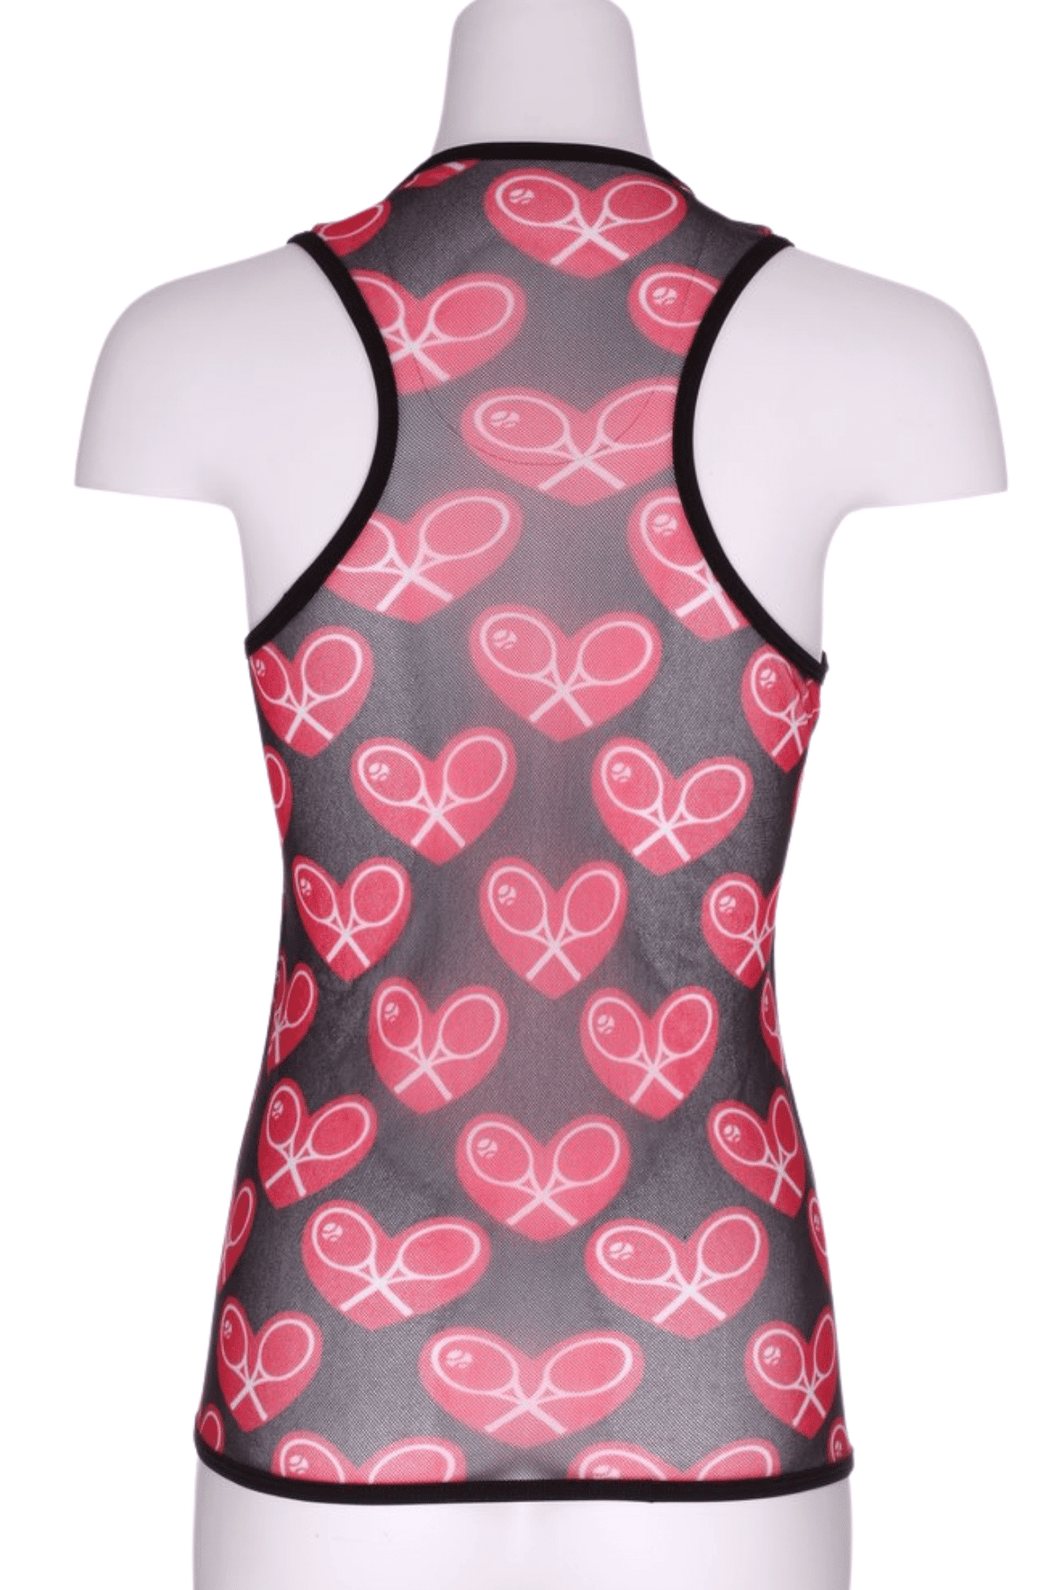 Red Vee Tank with Heart Mesh Back - I LOVE MY DOUBLES PARTNER!!!